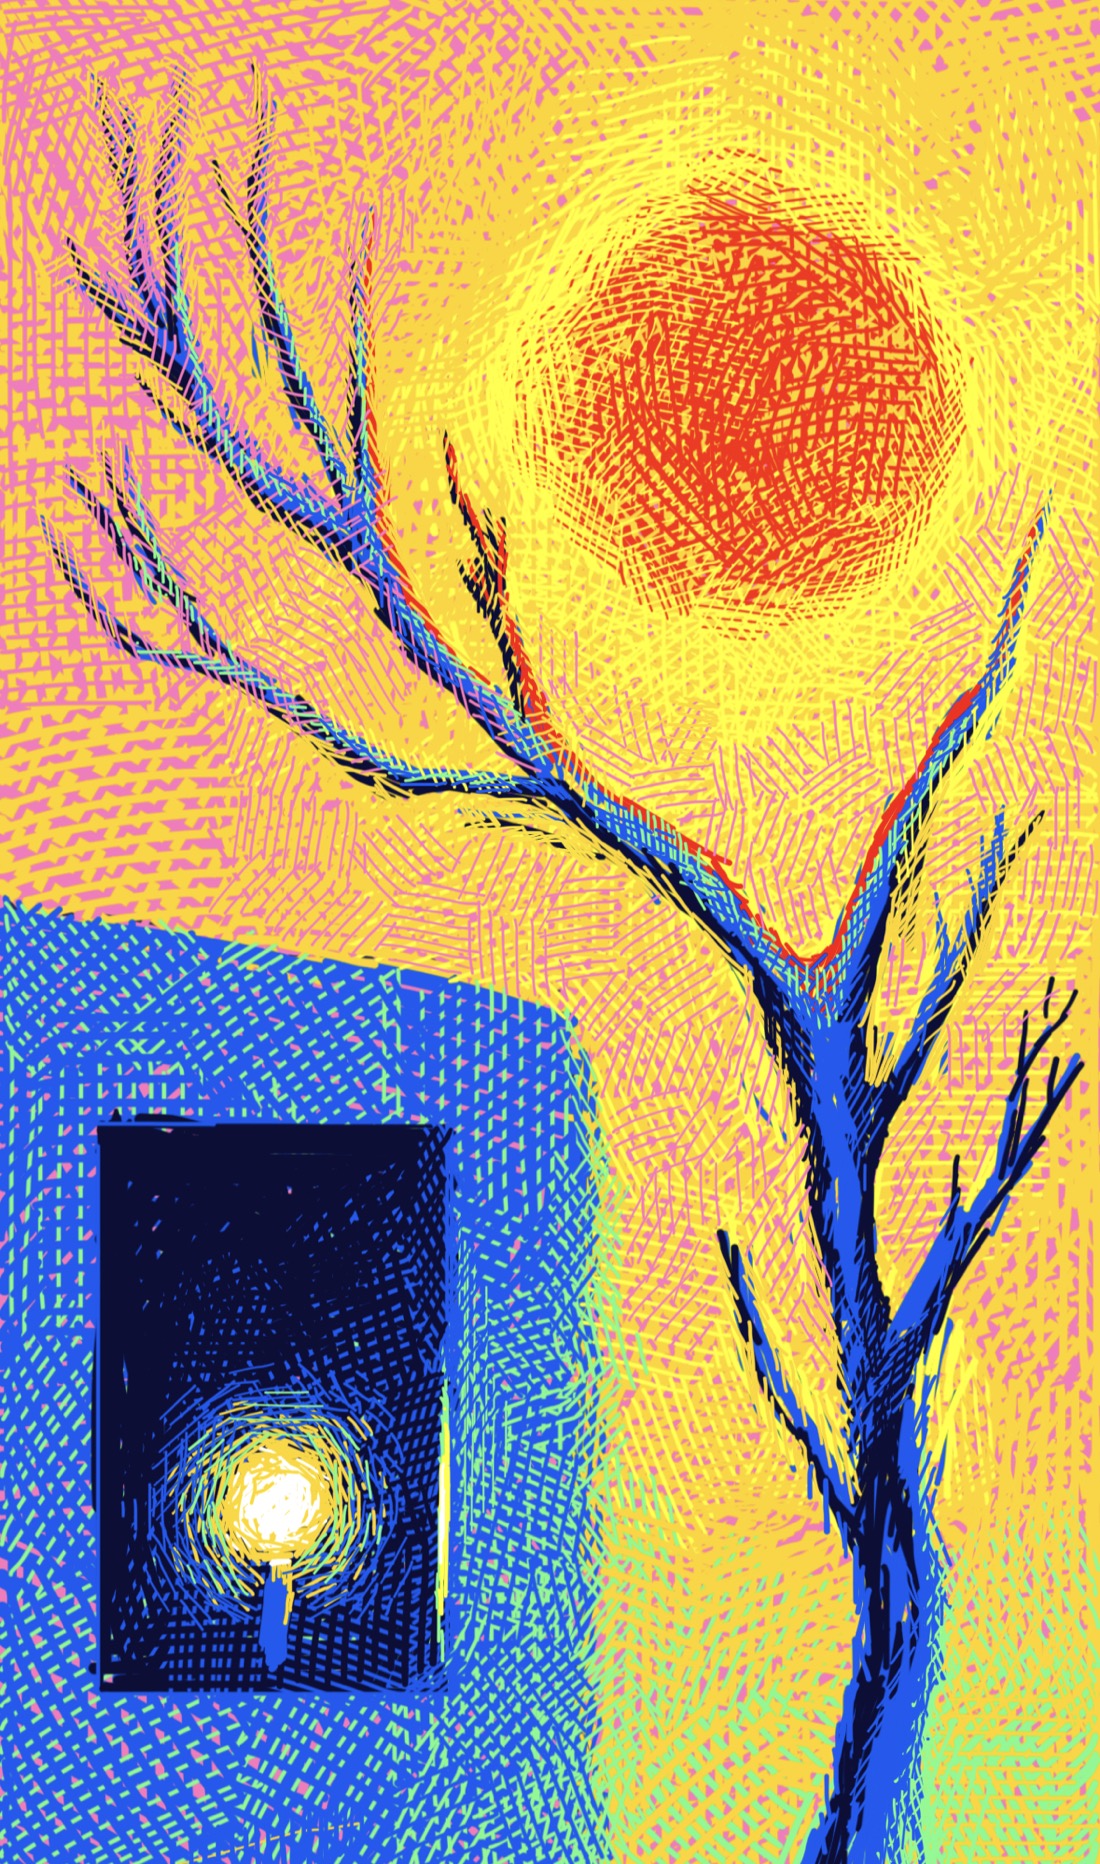 A tree stands next to a house. The house is a simple, blue, rectangular shape, occupying the lower left quarter of the drawing. The tree is a tall, leafless trunk with sticks for branches; it might be dead. Sitting in the hot yellow sky, positioned in the fork created by two diverging branches, sits a blazing red sun. This is the sun of desert at high noon. The window in the house is dark. Placed inside it is a single candle. The style of the piece looks impressionist: bright colors, lots of strokes.